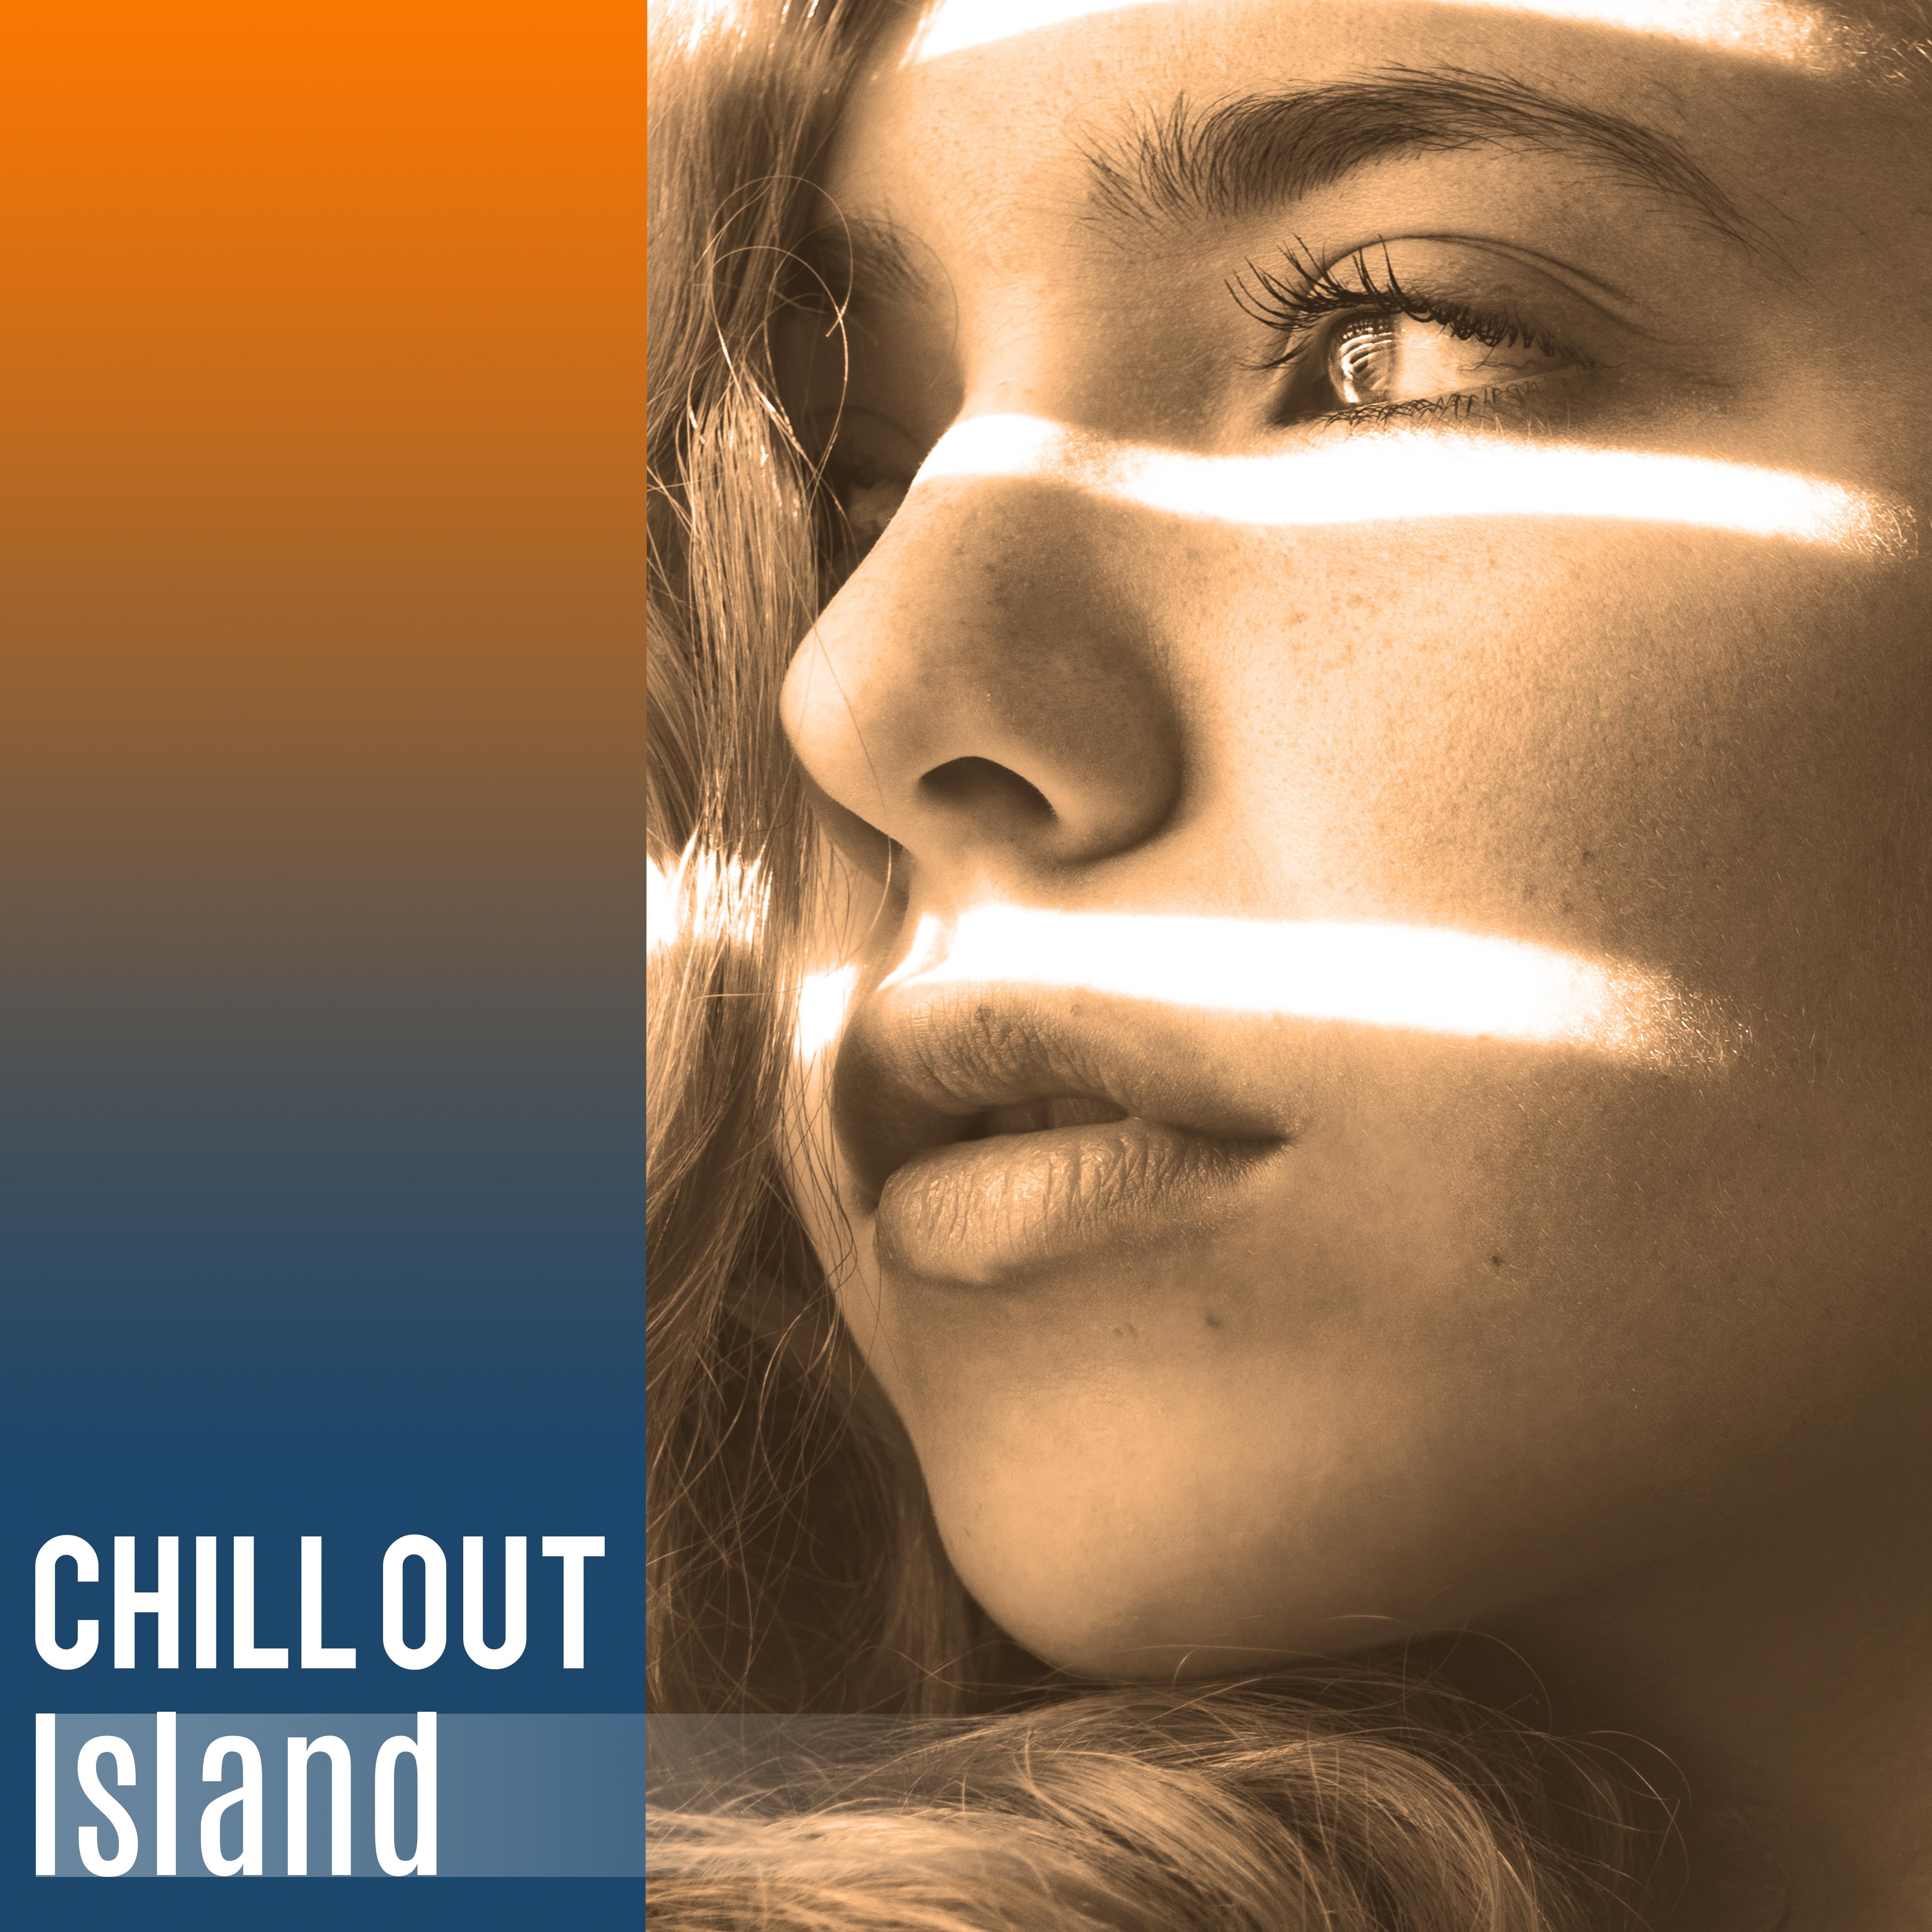 Chillout Island  Deep Chill Out Music, Summer Music, Just Relax, Chillout Party, Electronic Music